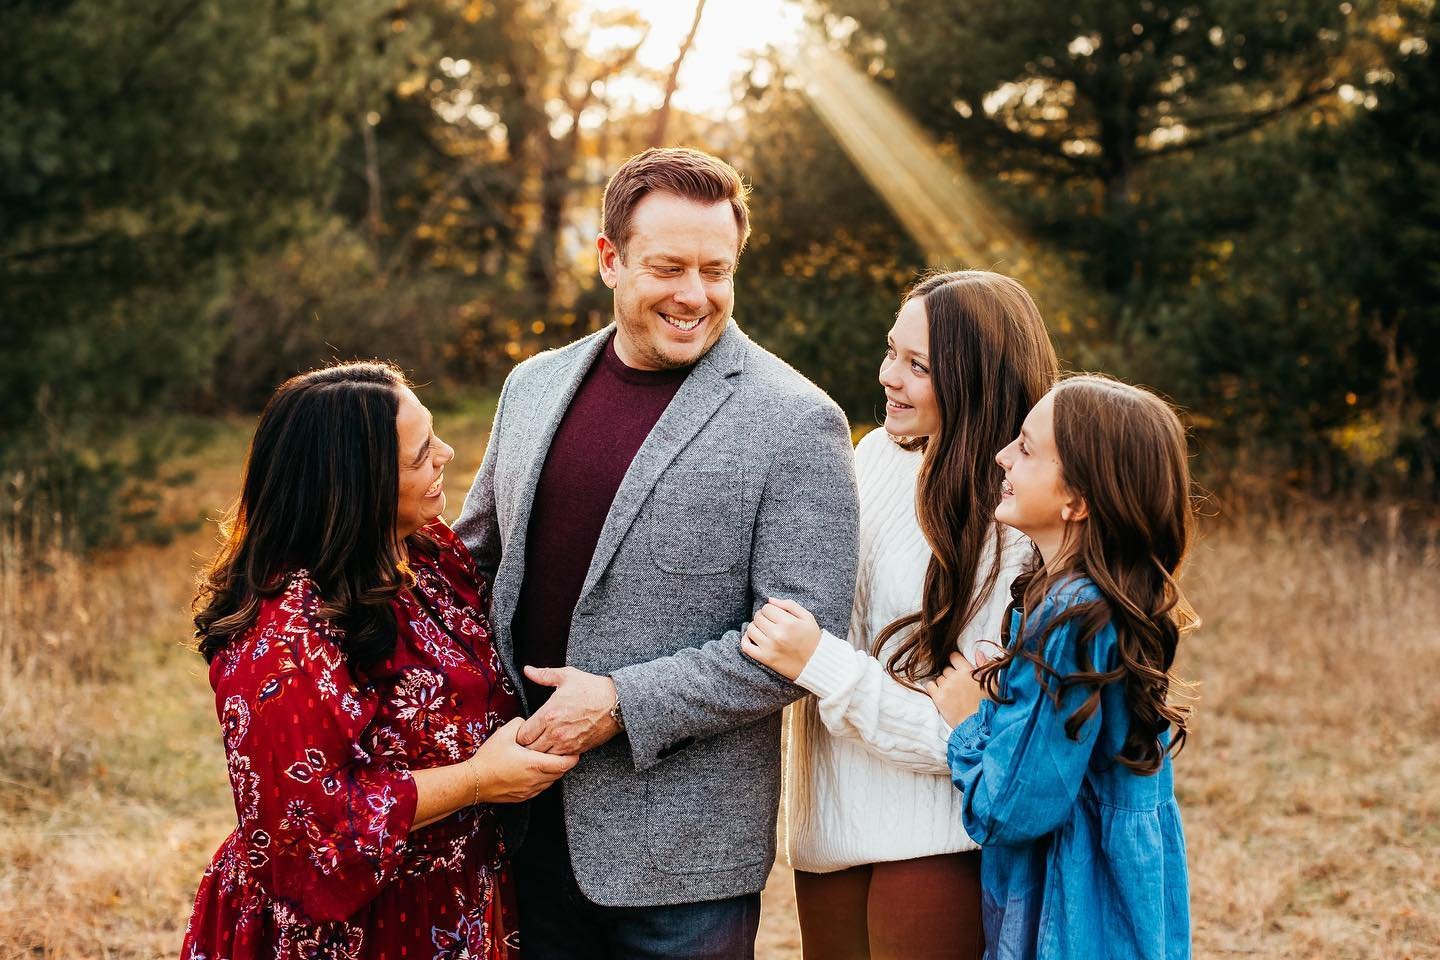 This family got the most perfect day for their photos! ❤️✨